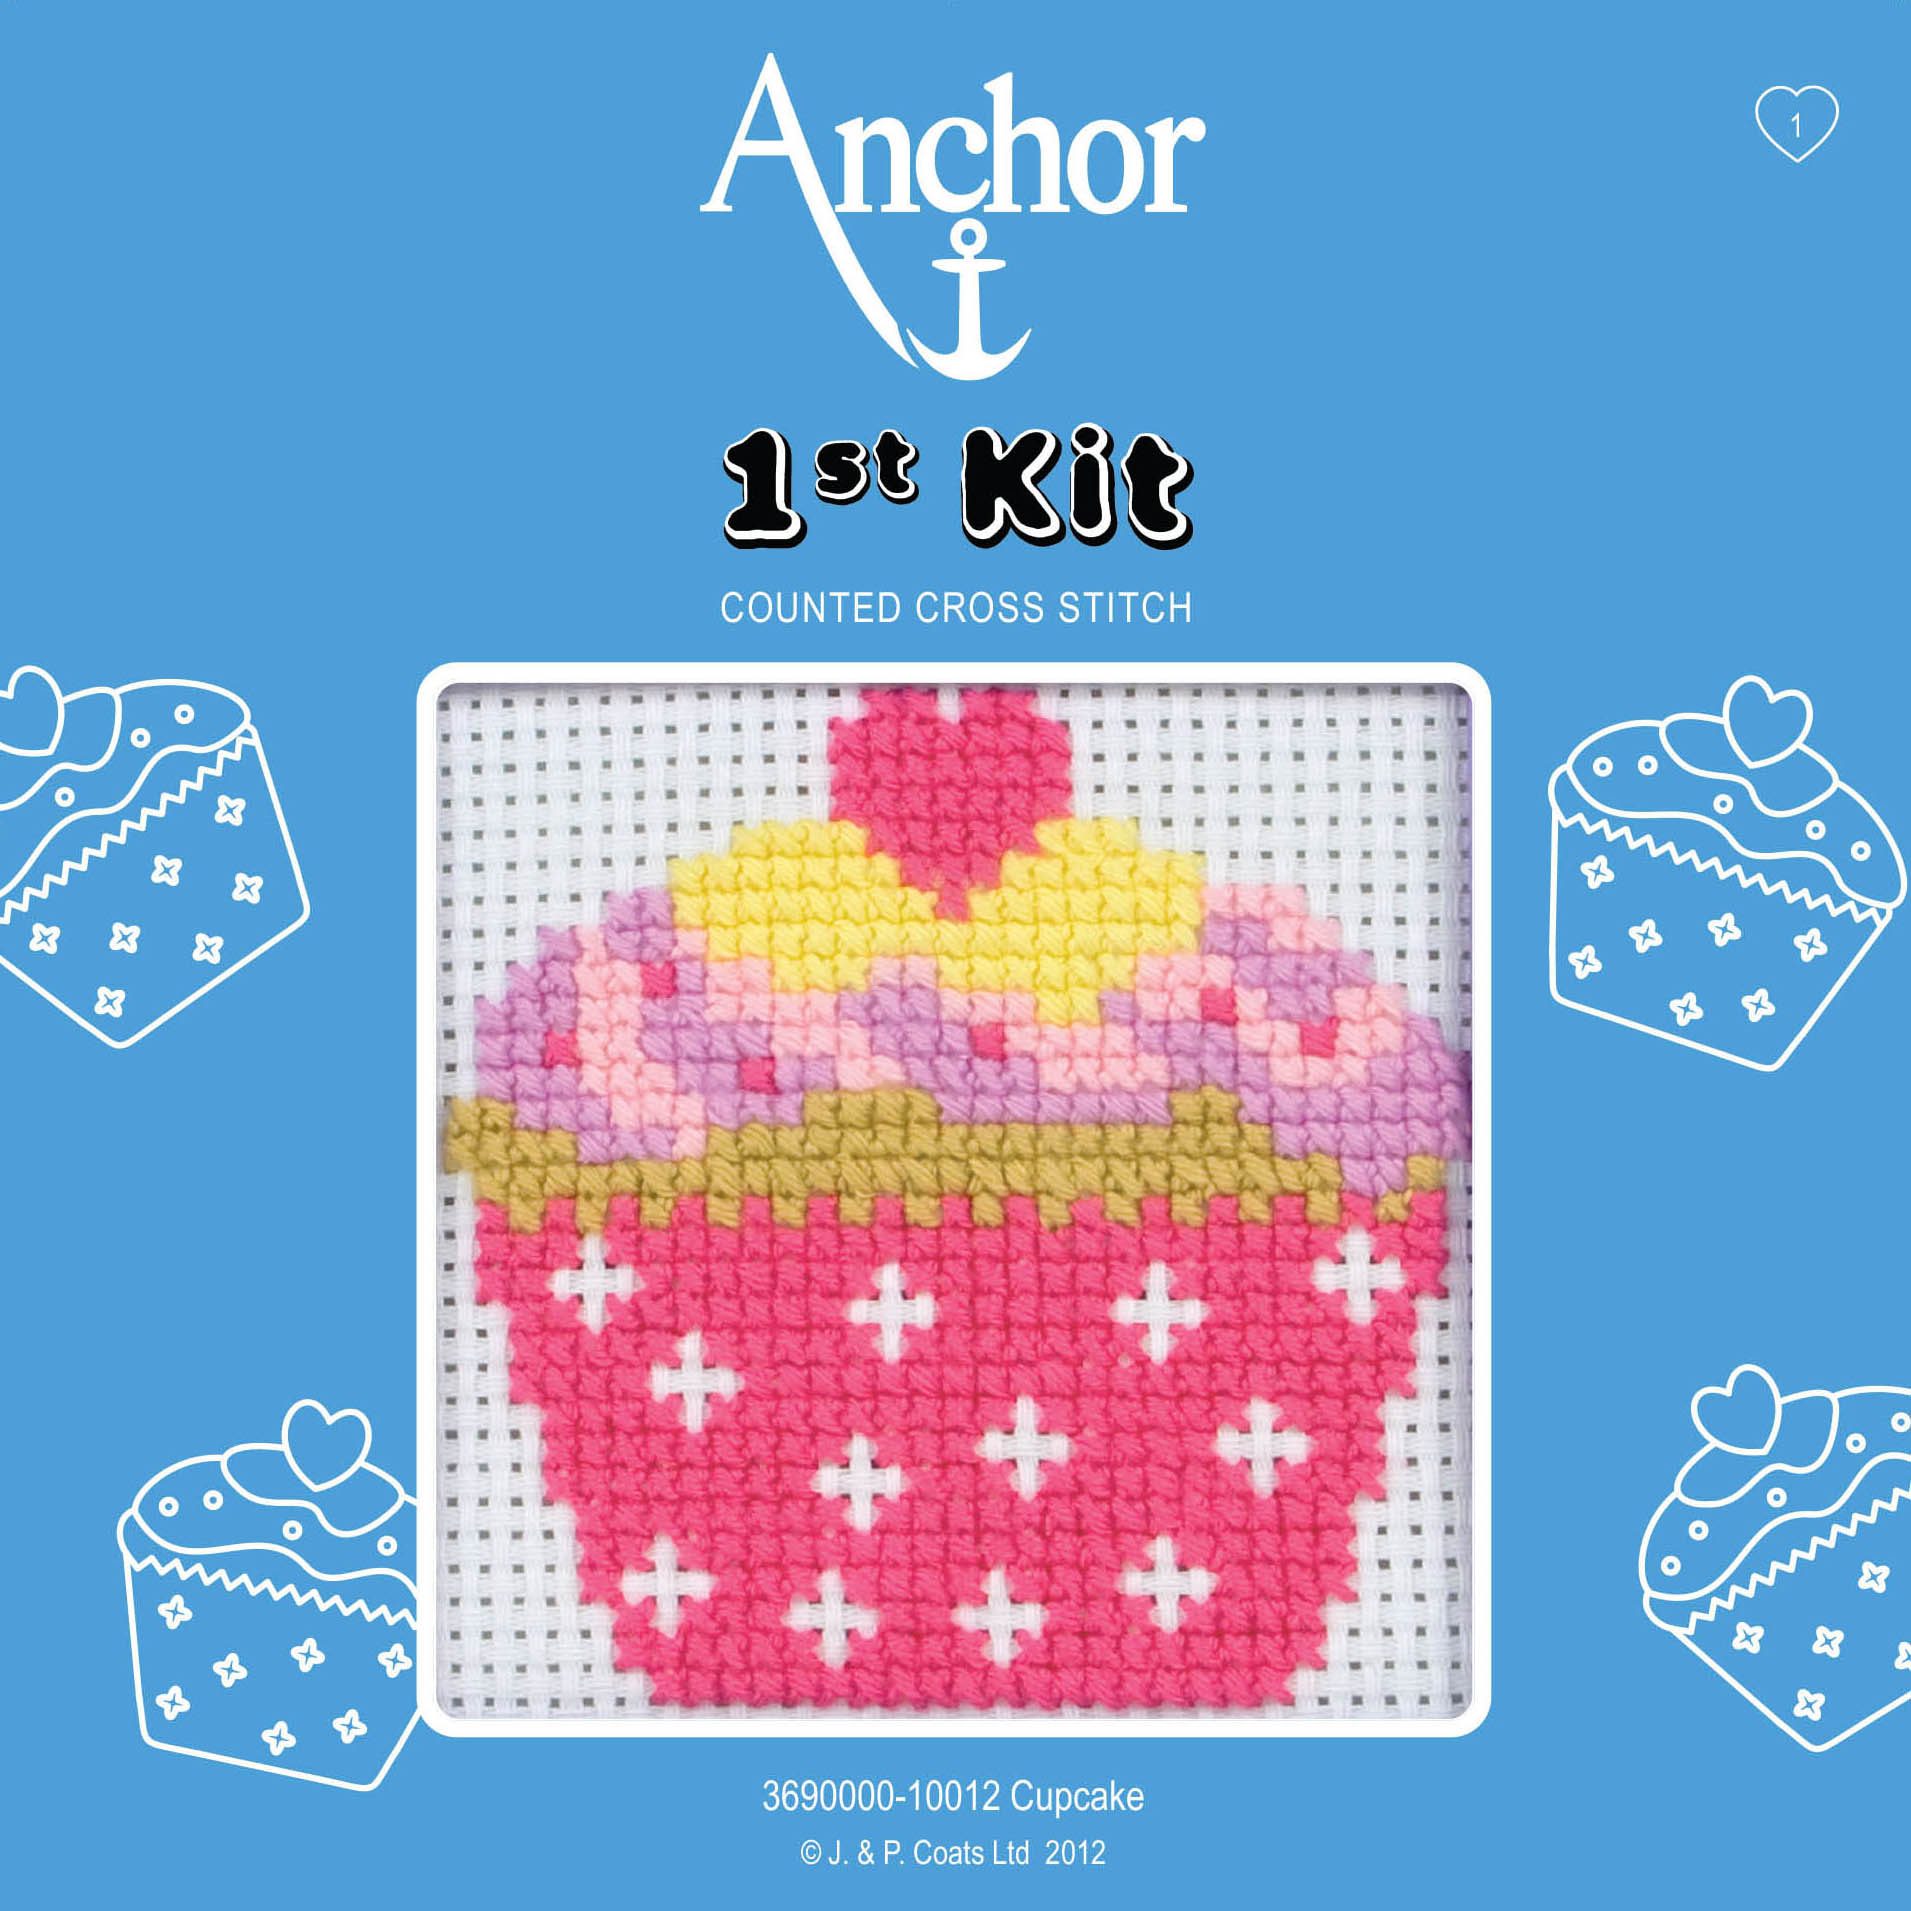 Anchor 1st Counted Cross Stitch Kit – Cupcake product image